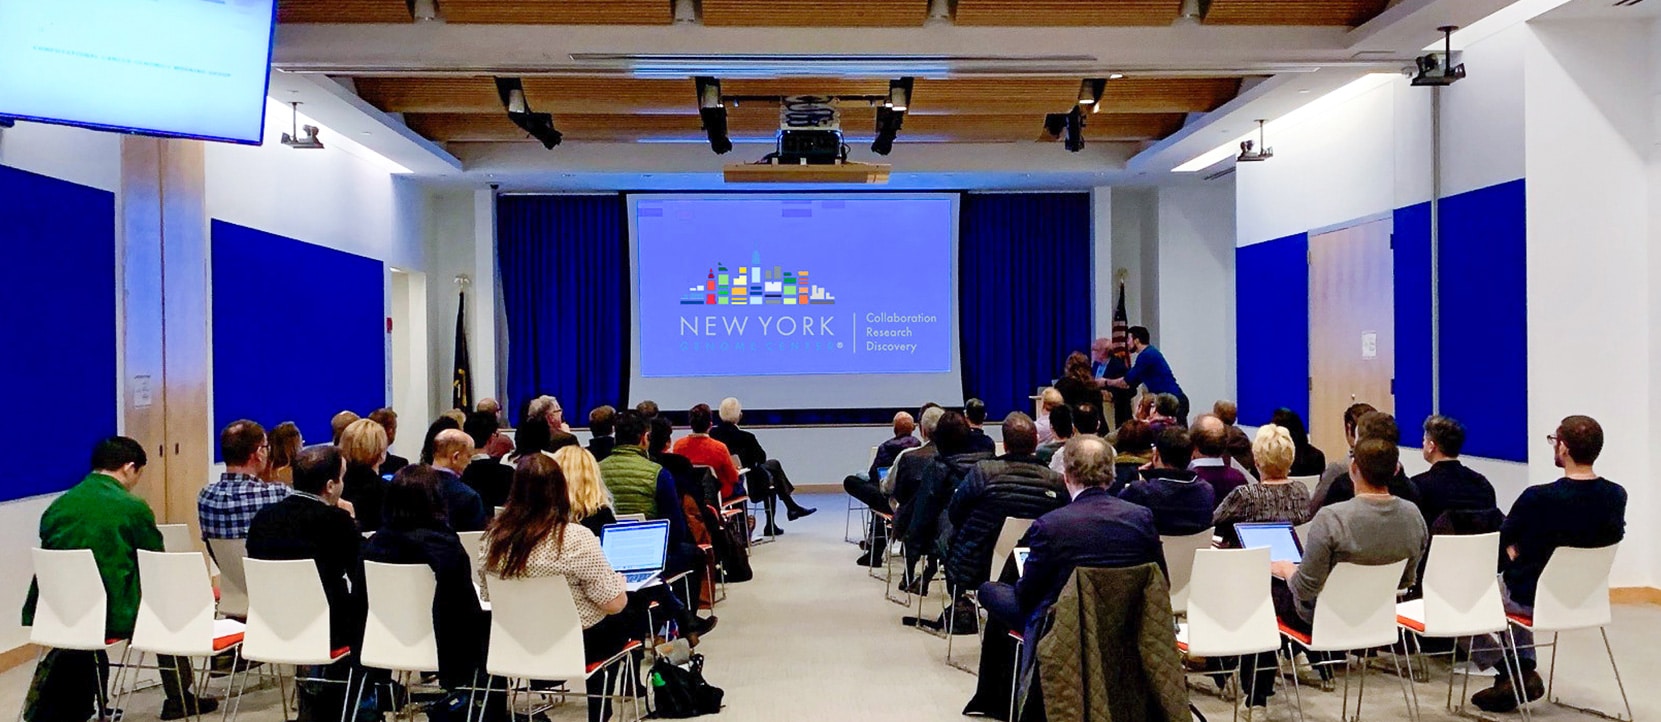 A group of NYGC affiliate members meet in a presentation space